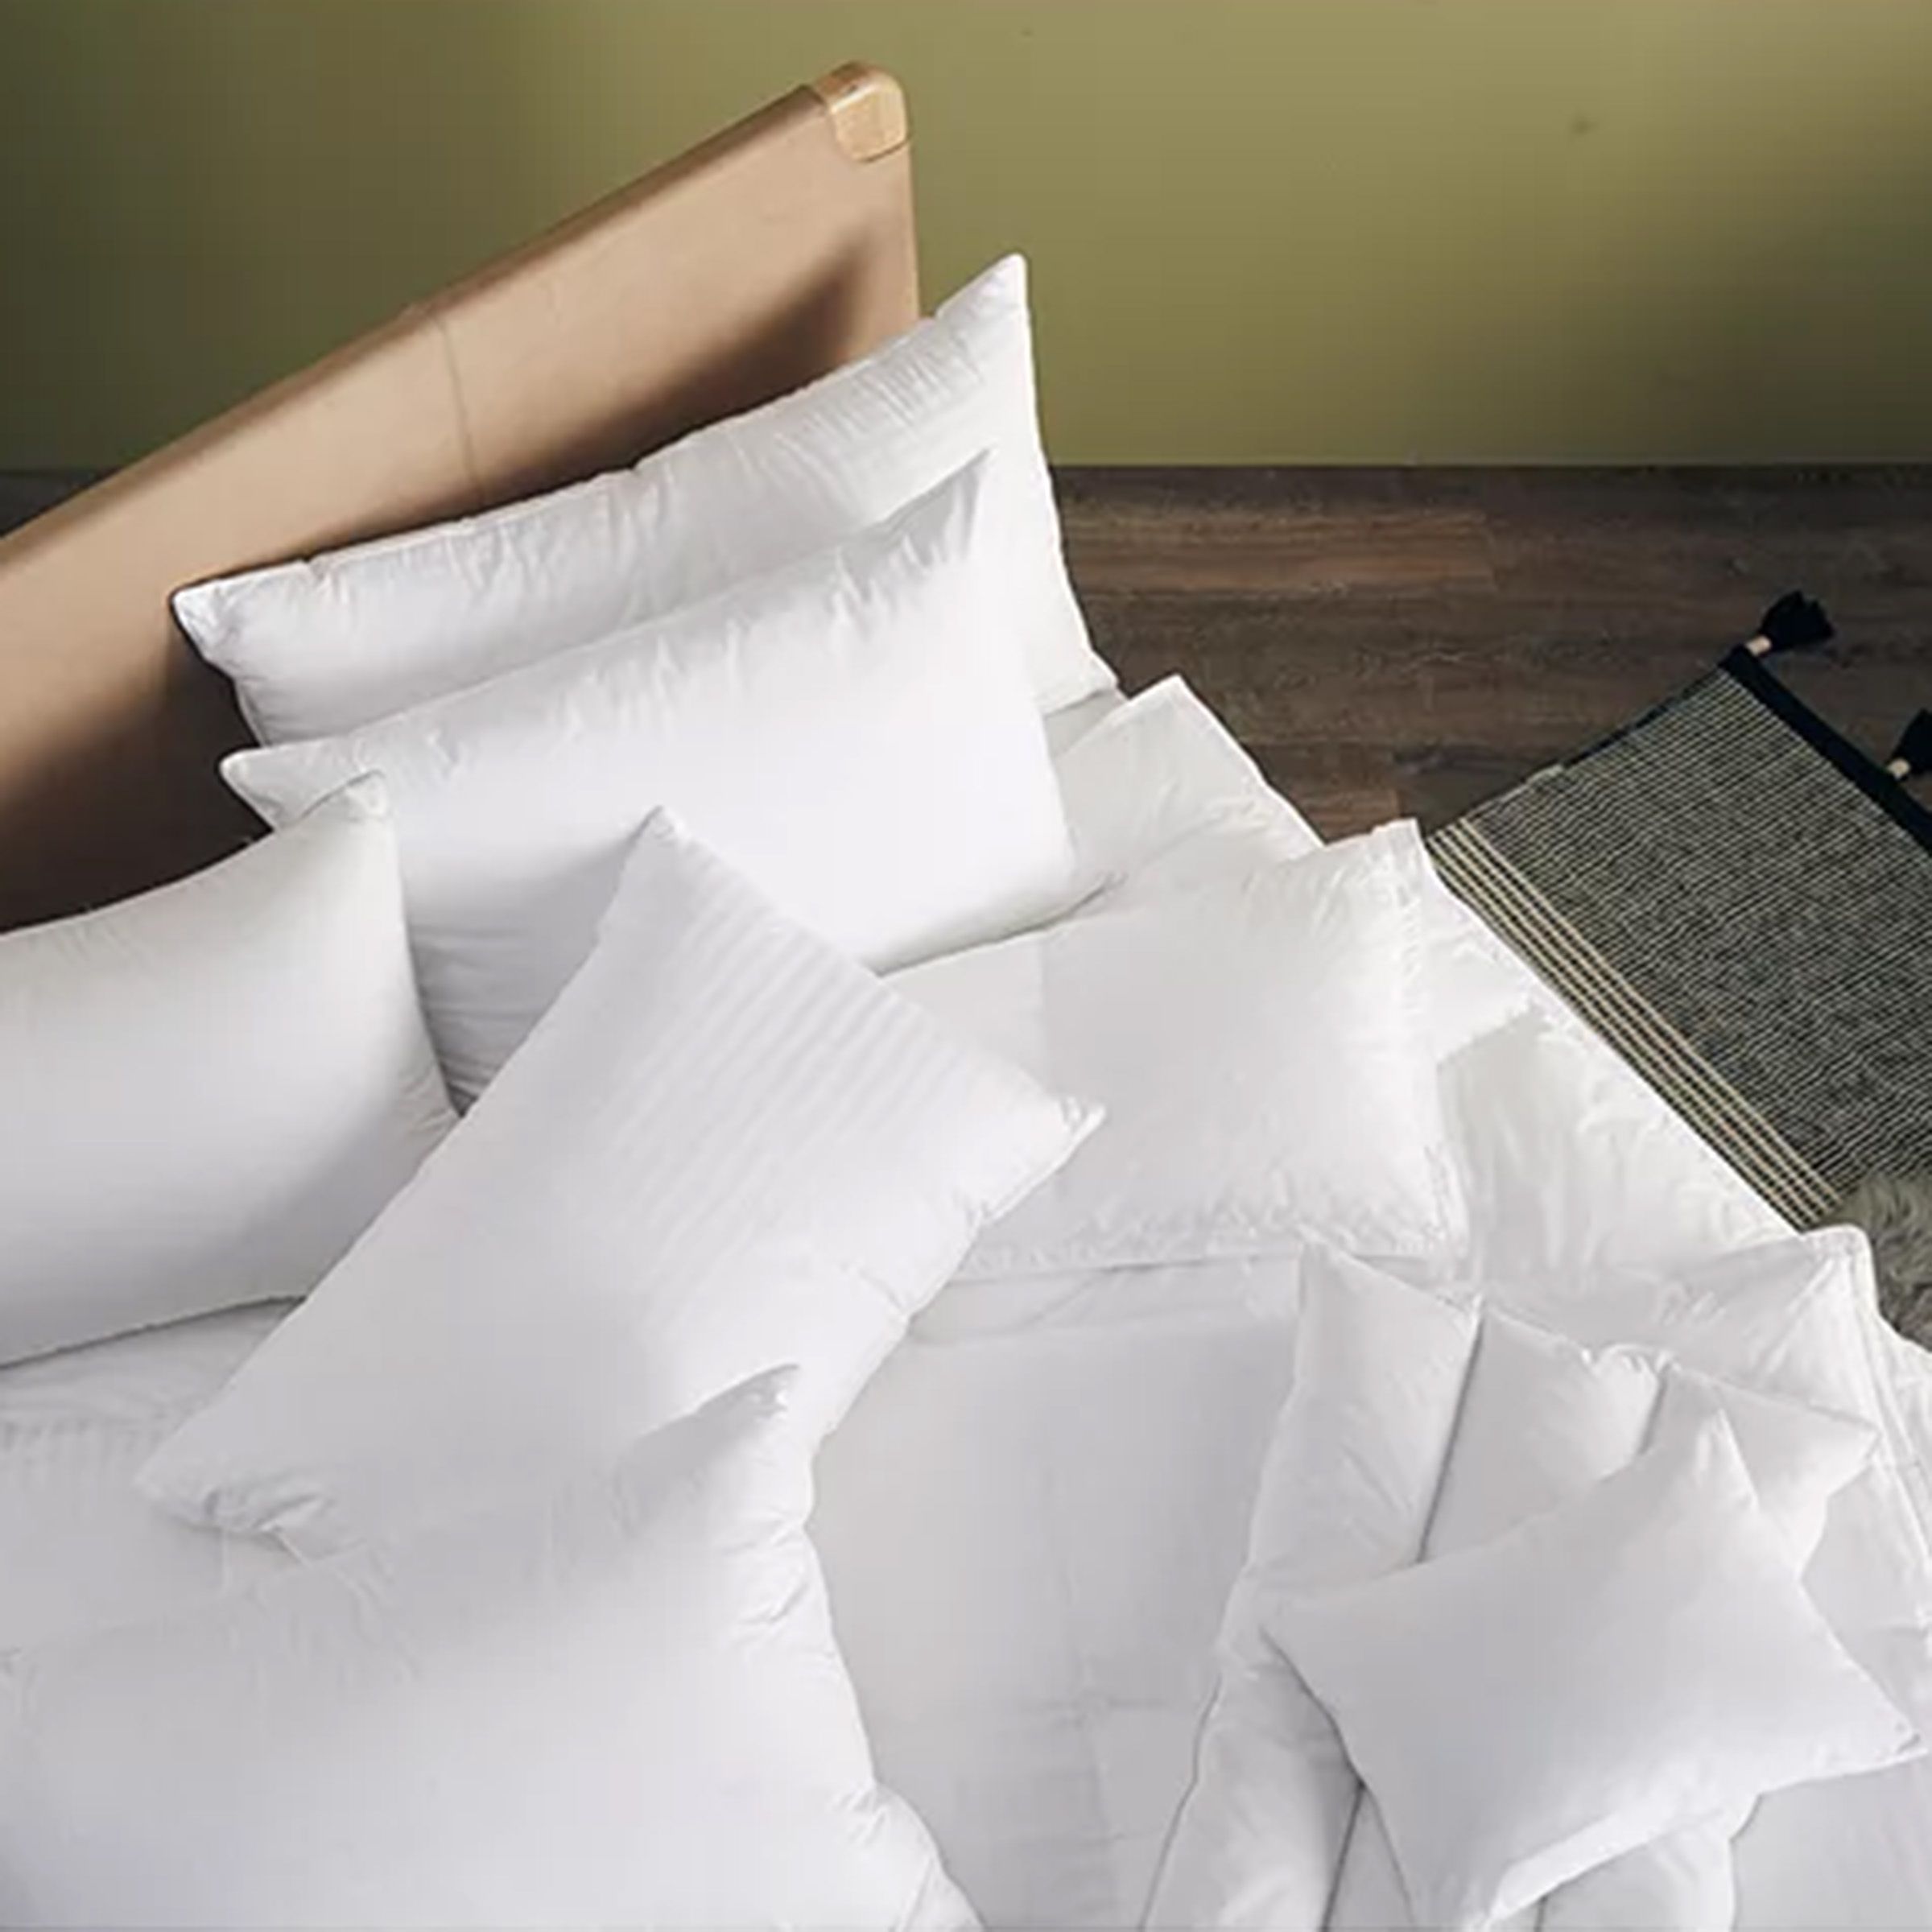 Pile of white pillows on a bed